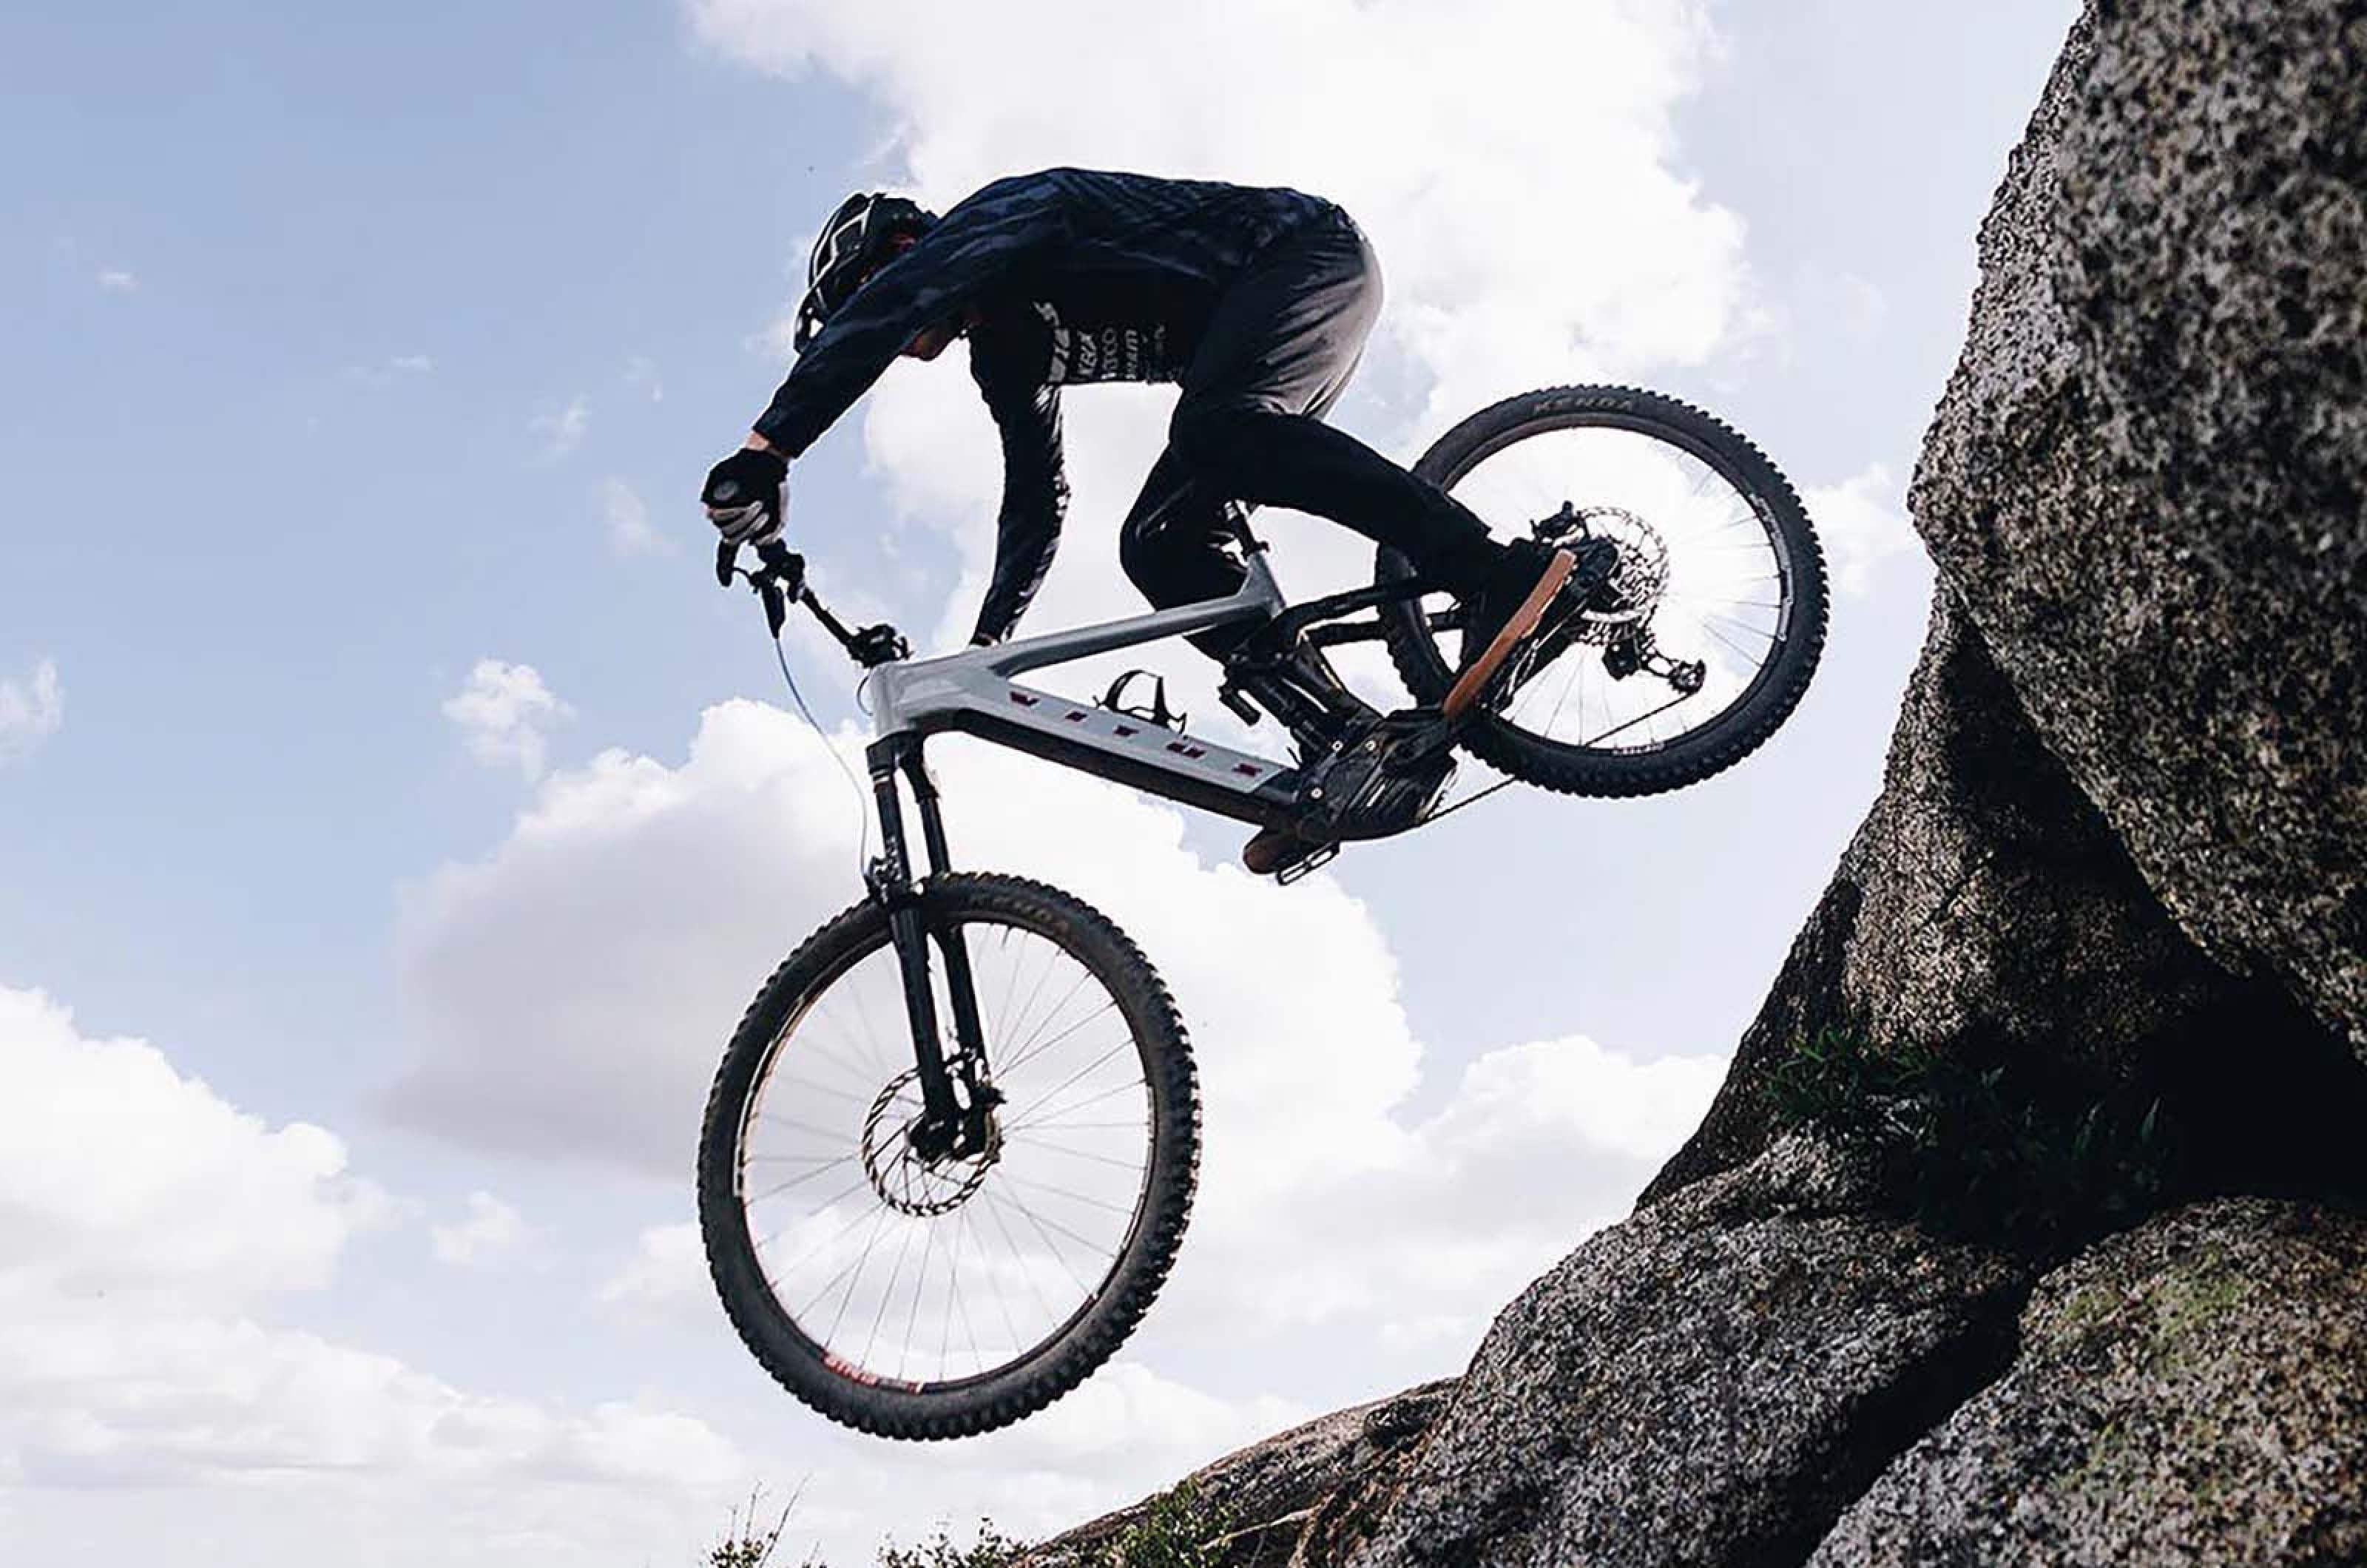 <p>It’s currently out of stock on Wiggle, but if you’re after a good value eMTB then keep an eye on the stock status. The entry-level Vitus E-Sommet VR is “engineered for enduro racing”, with an aluminium frame, mullet wheels (29” and 27.5”), it uses a Shimano STEPS E7000 motor system and a Shimano Deore 11-speed drivetrain. </p>  <p>It’s also got a 504Wh battery so plenty of capacity for long trail rides or even a bit of e-Enduro racing. With 170mm up front you’ve got plenty of travel for tackling technical trails or pushing your limits between the tape.</p>